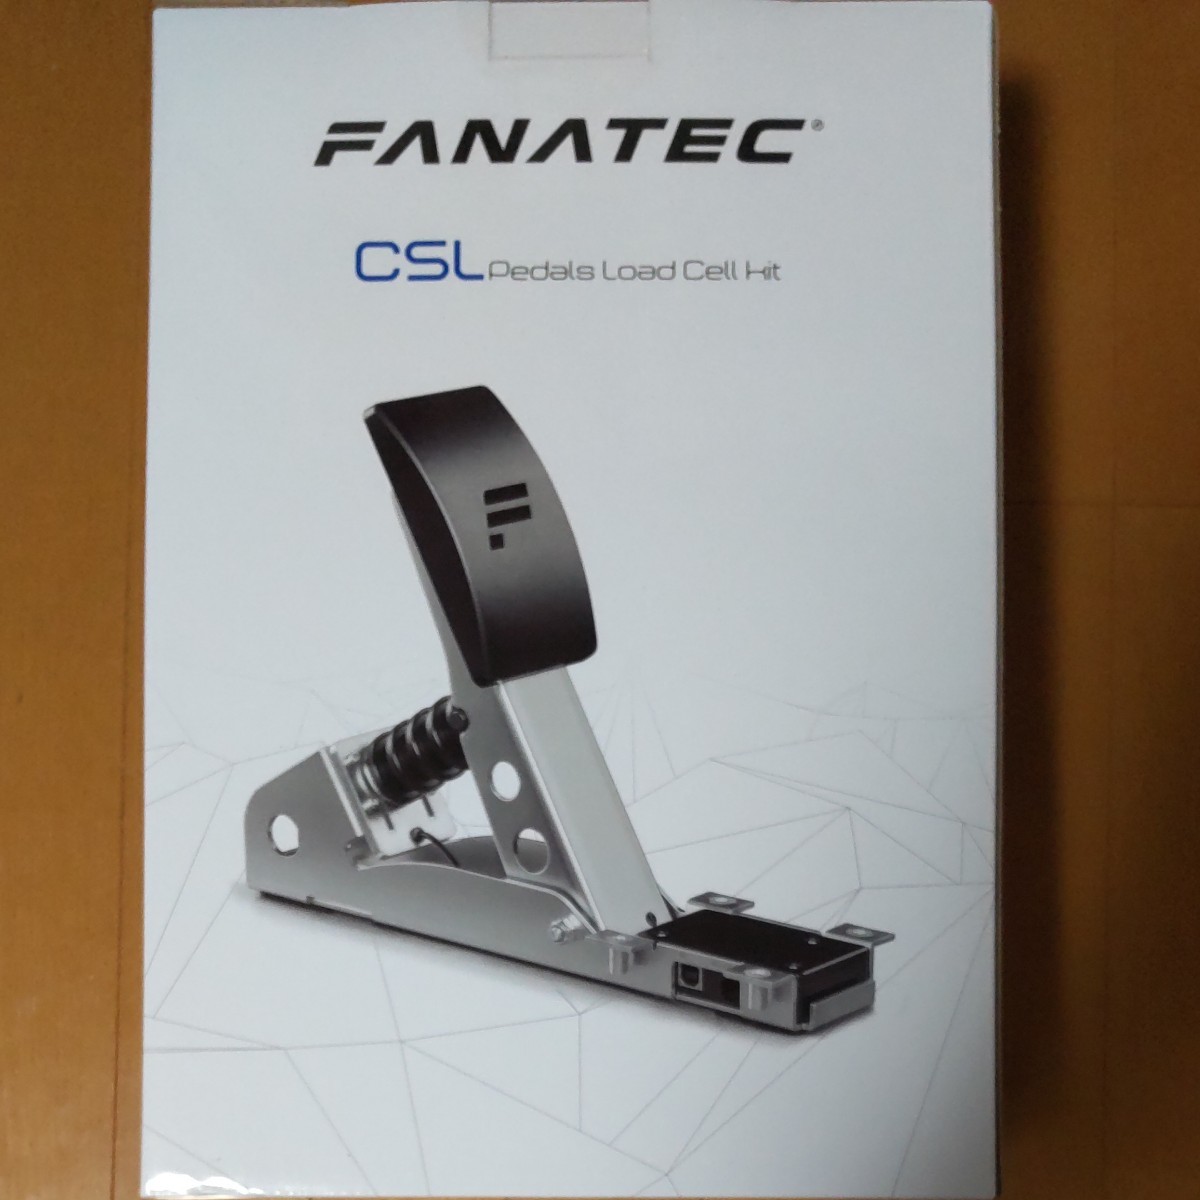 FANATEC CSL Pedals Load Cell kit ファナテック ペダル ロードセル　キット